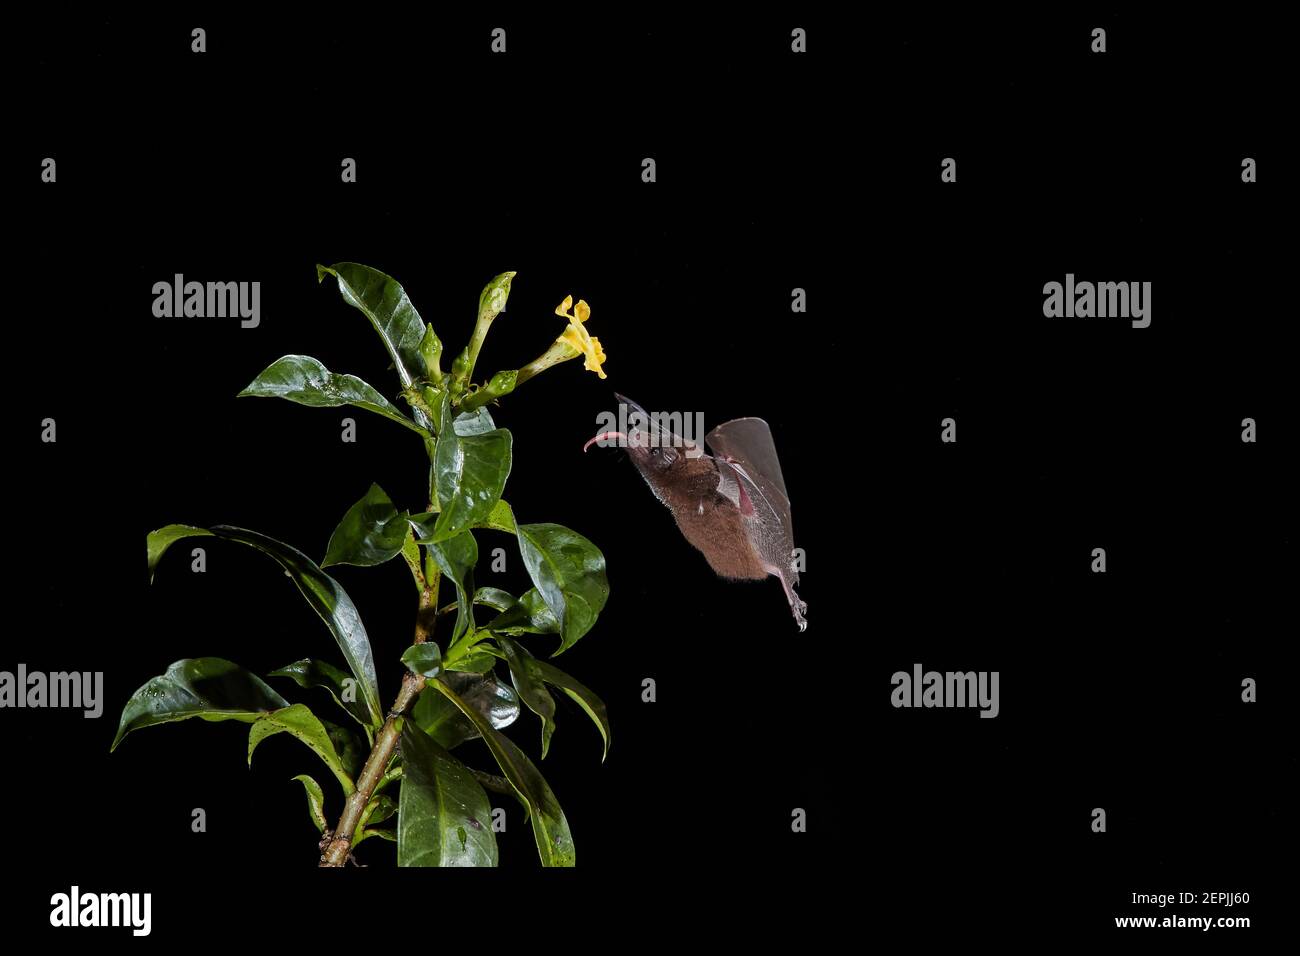 Isolated on black, Lonchophylla robusta, Orange nectar bat, feeding on nectar by long tongue from tropical flower. Side view. Night flash photography. Stock Photo